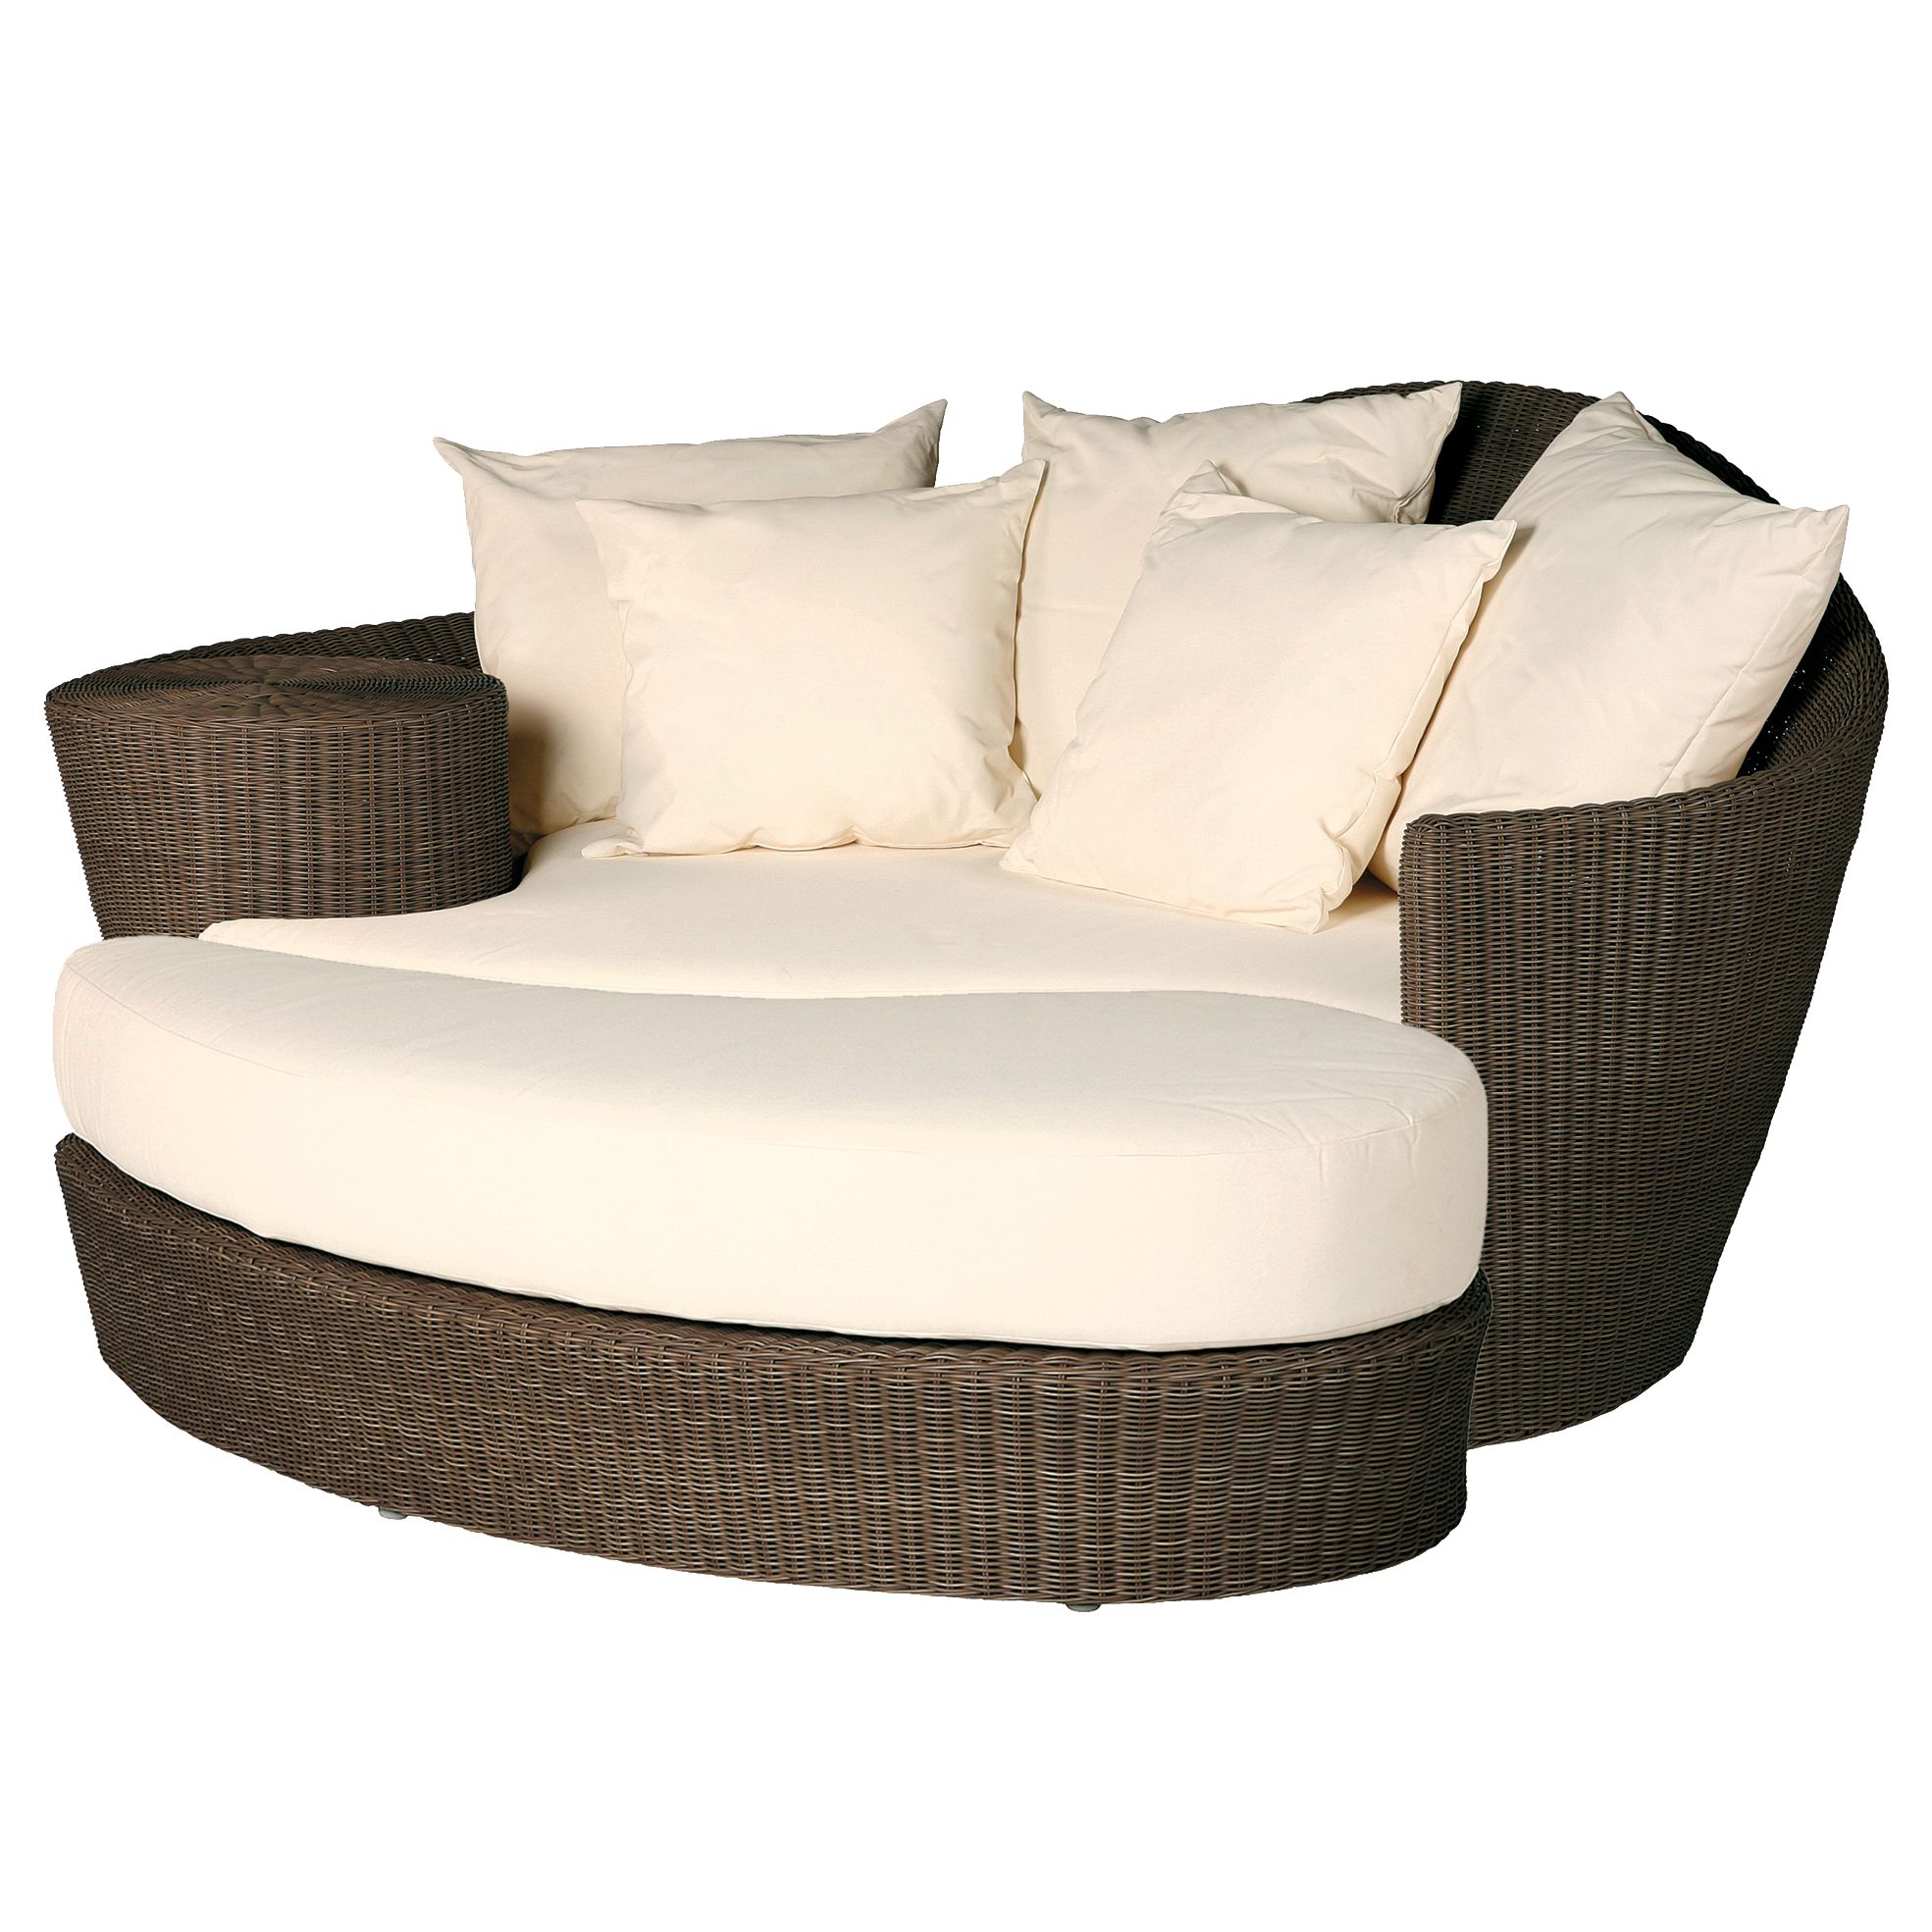 Barlow Tyrie Dune Day Bed and Ottoman, Java at JohnLewis